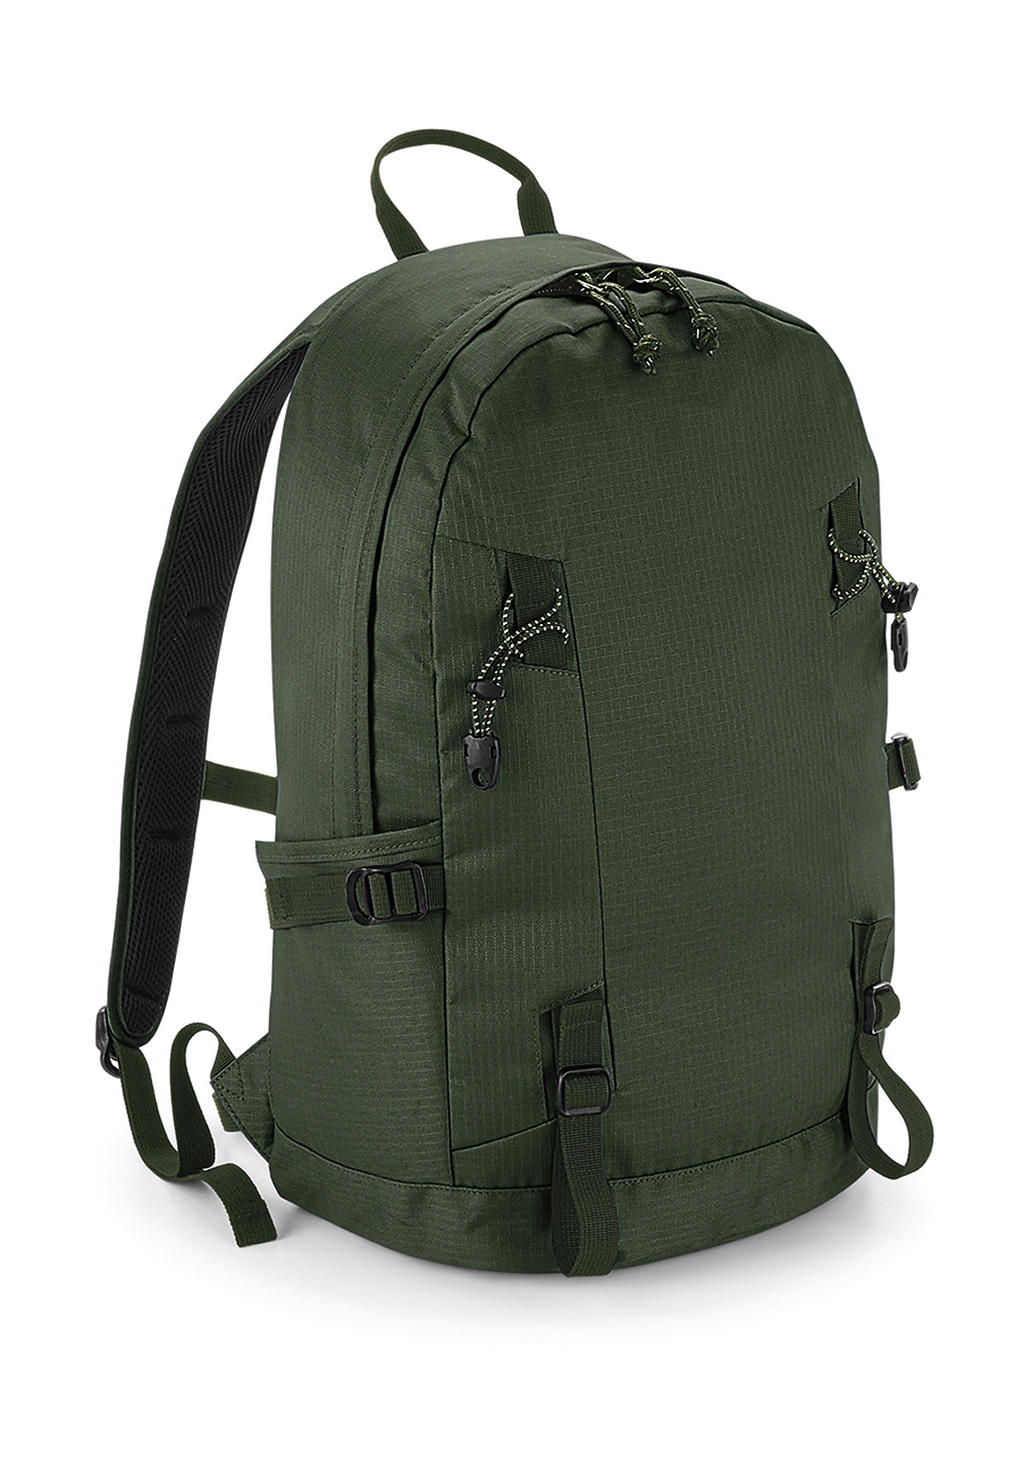  Everyday Outdoor 20L Backpack in Farbe Olive Green